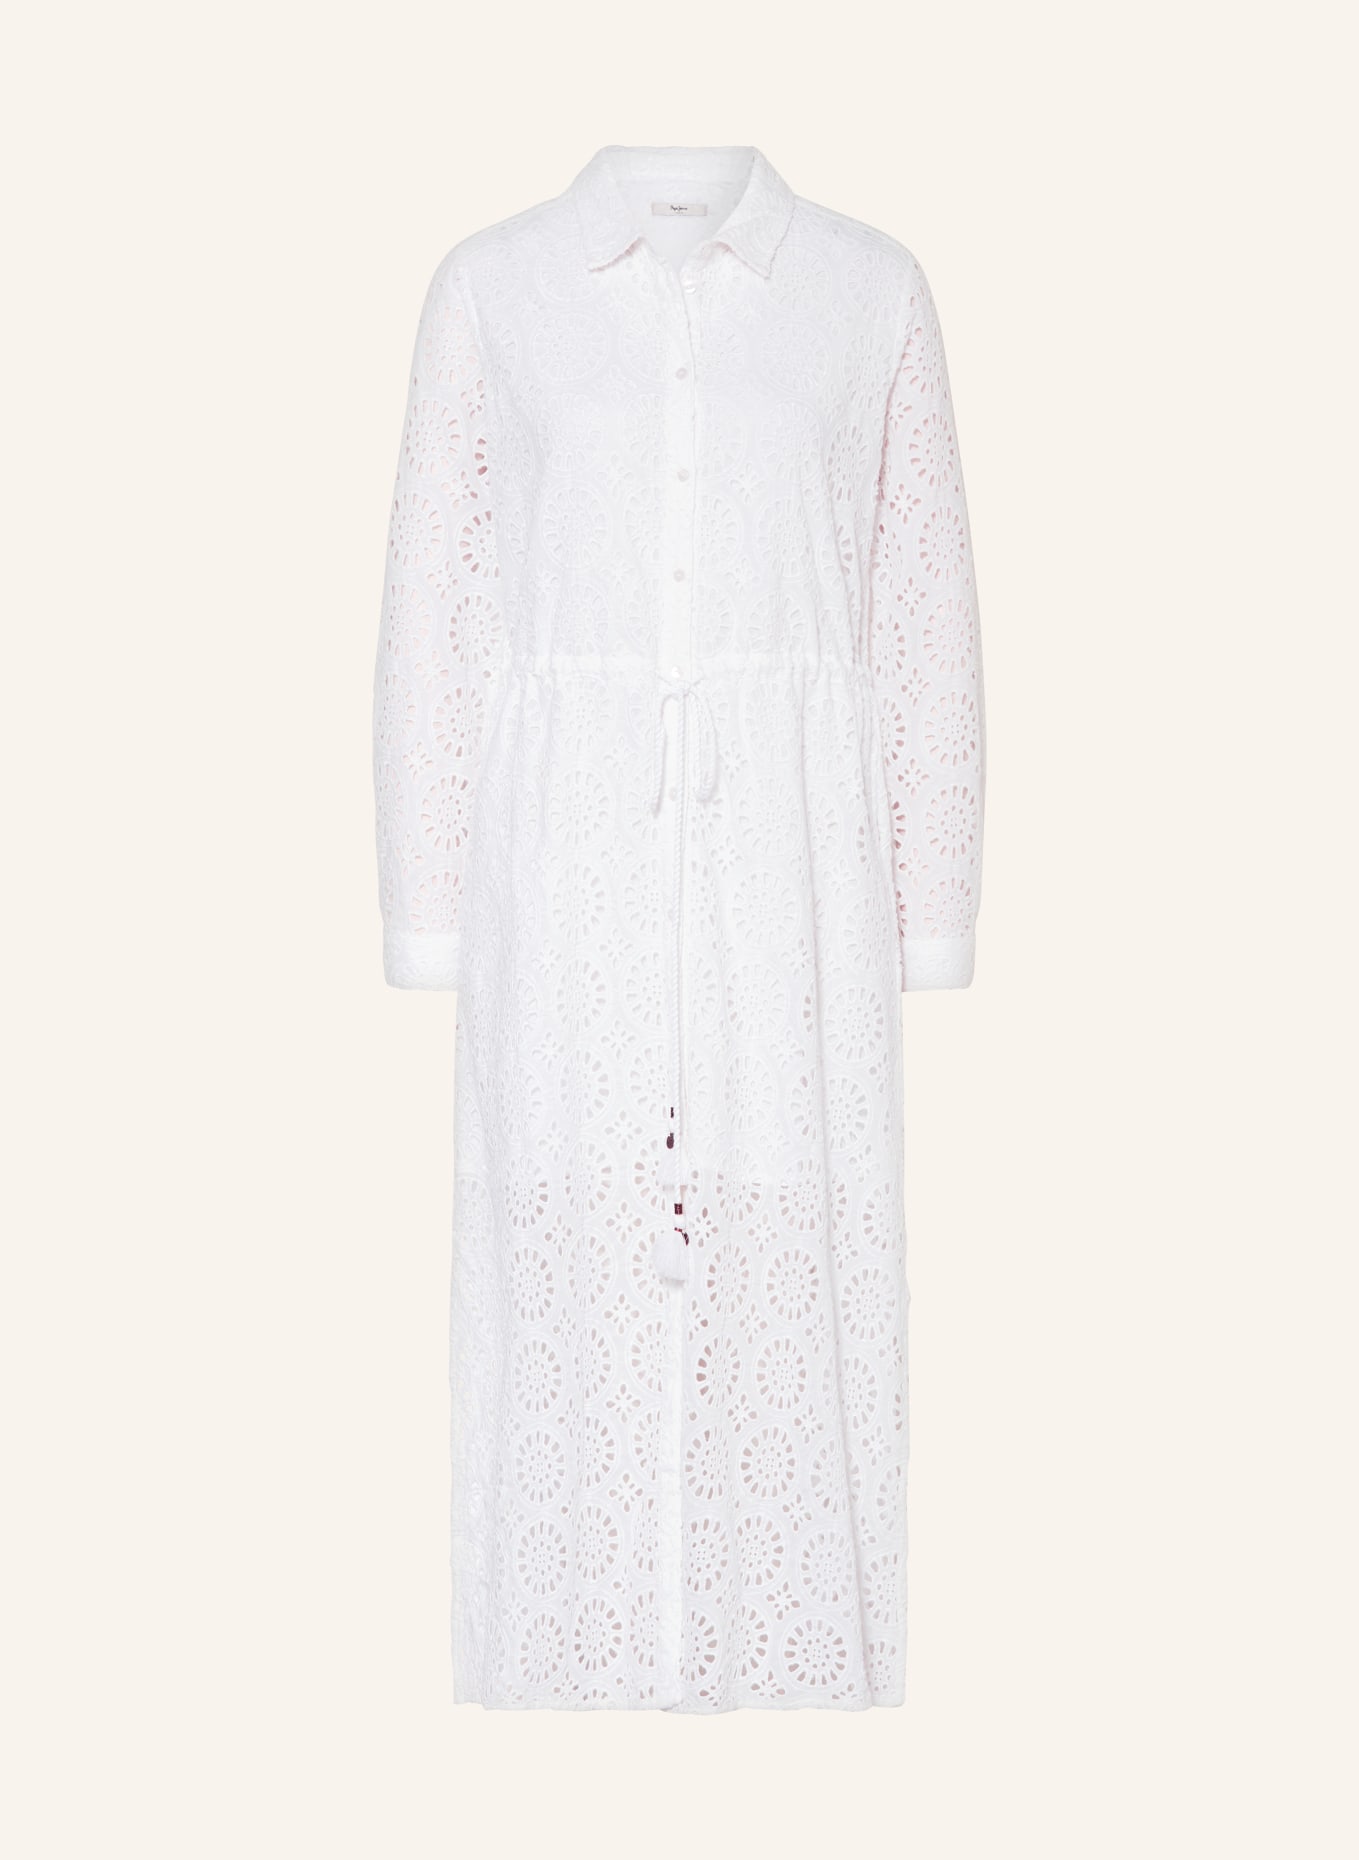 Pepe Jeans Shirt dress ETHEL made of lace, Color: WHITE (Image 1)